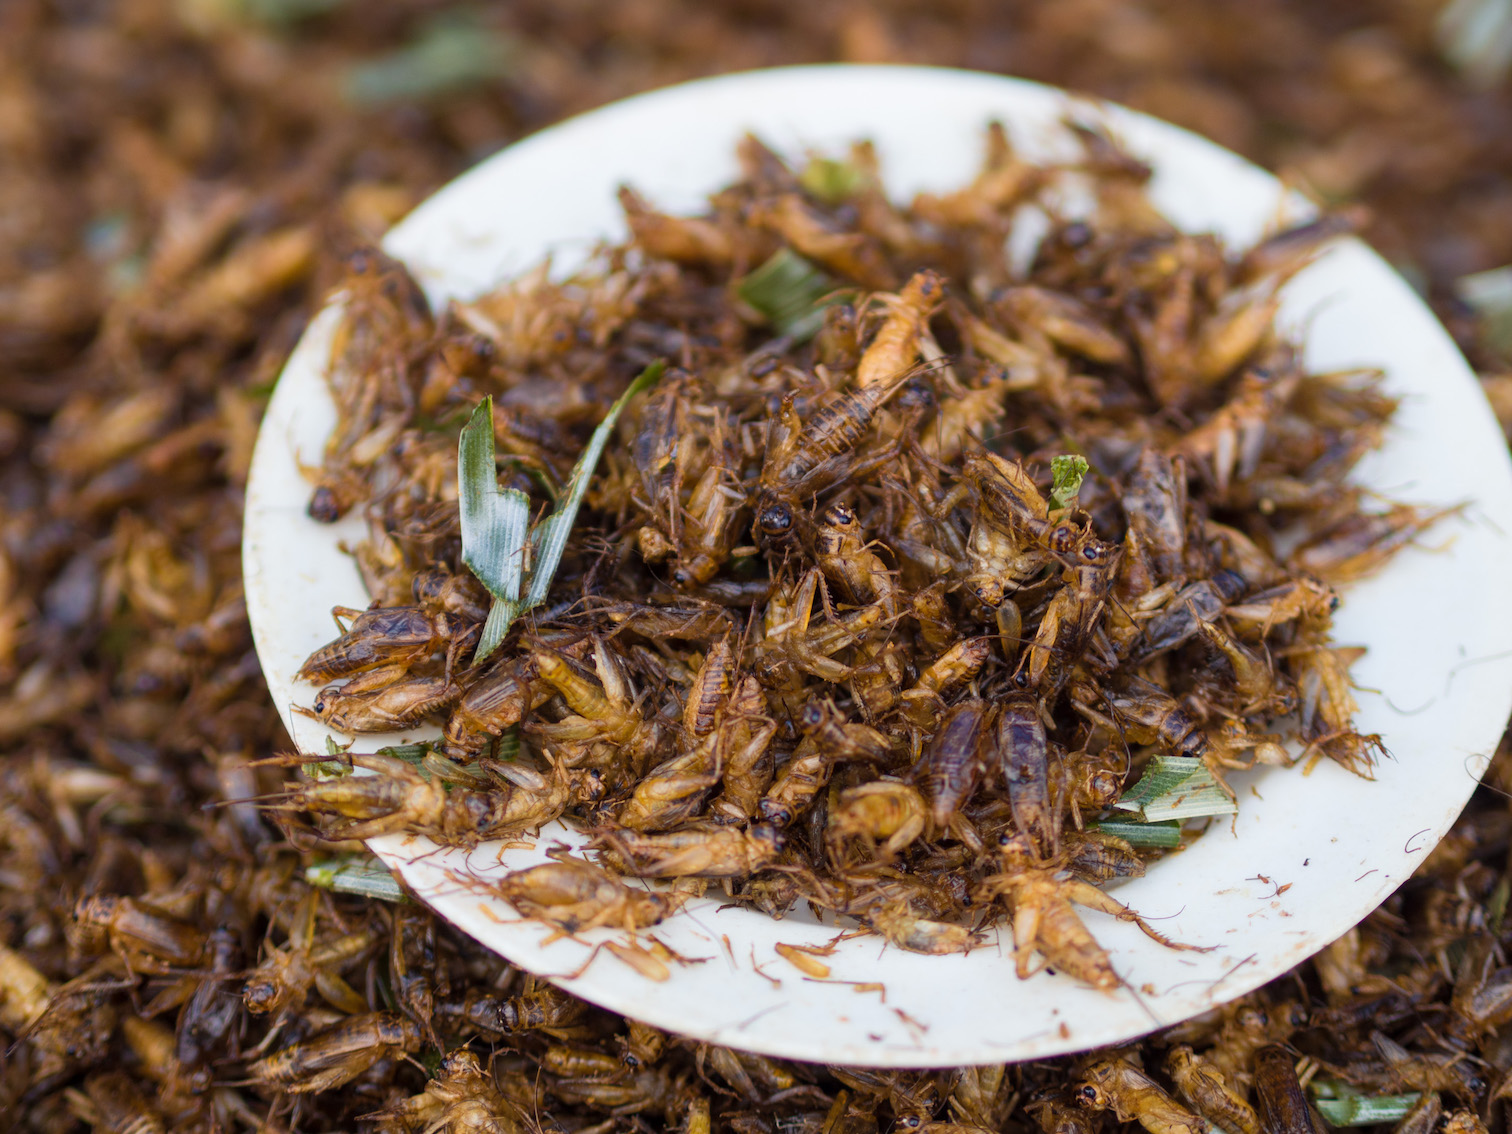 Crickets are now being farmed in Kenya as a food source for humans